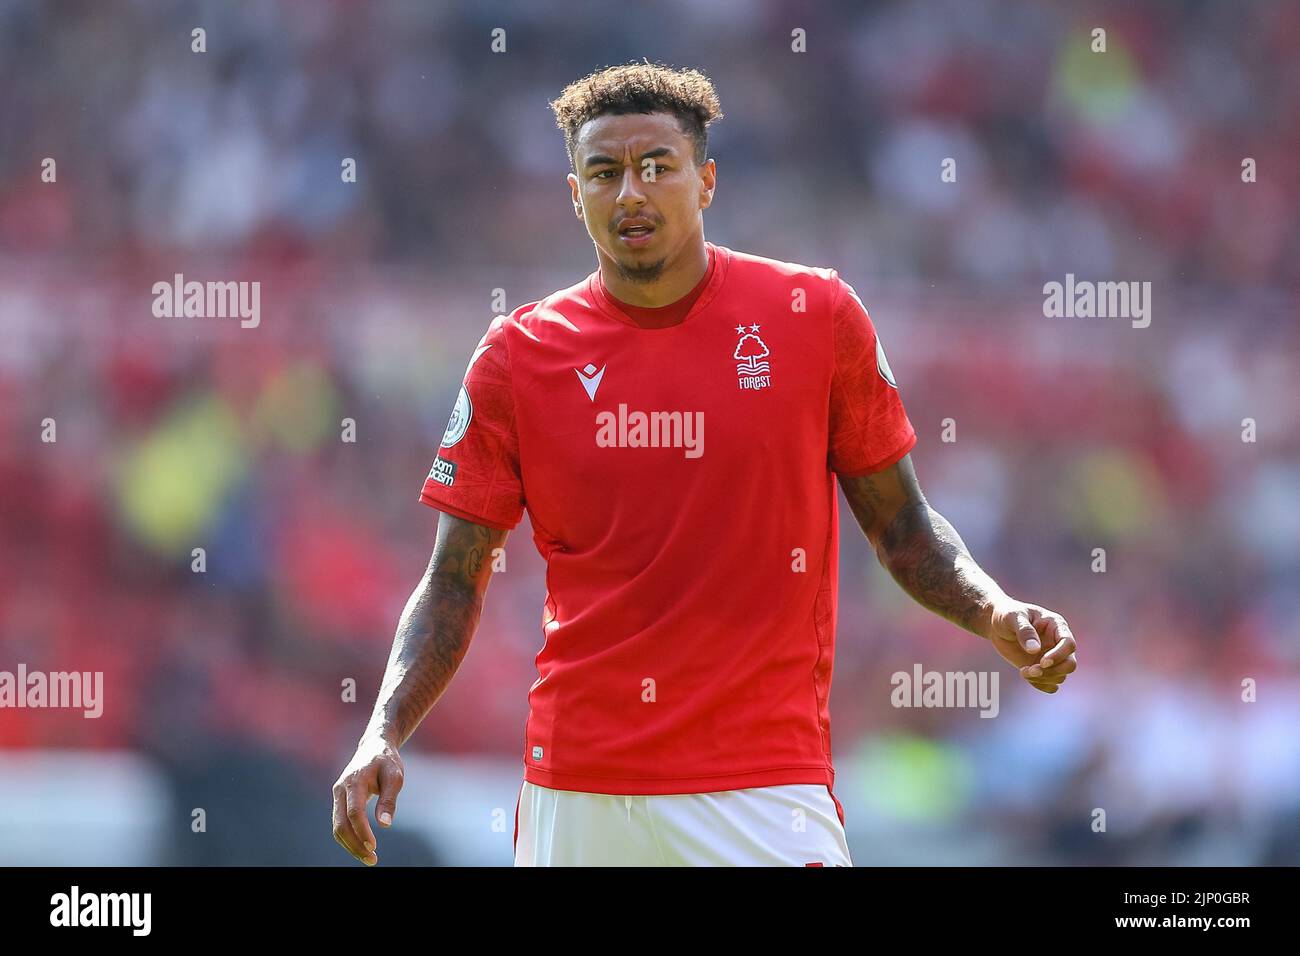 Jesse Lingard #11 of Nottingham Forest during the game Stock Photo